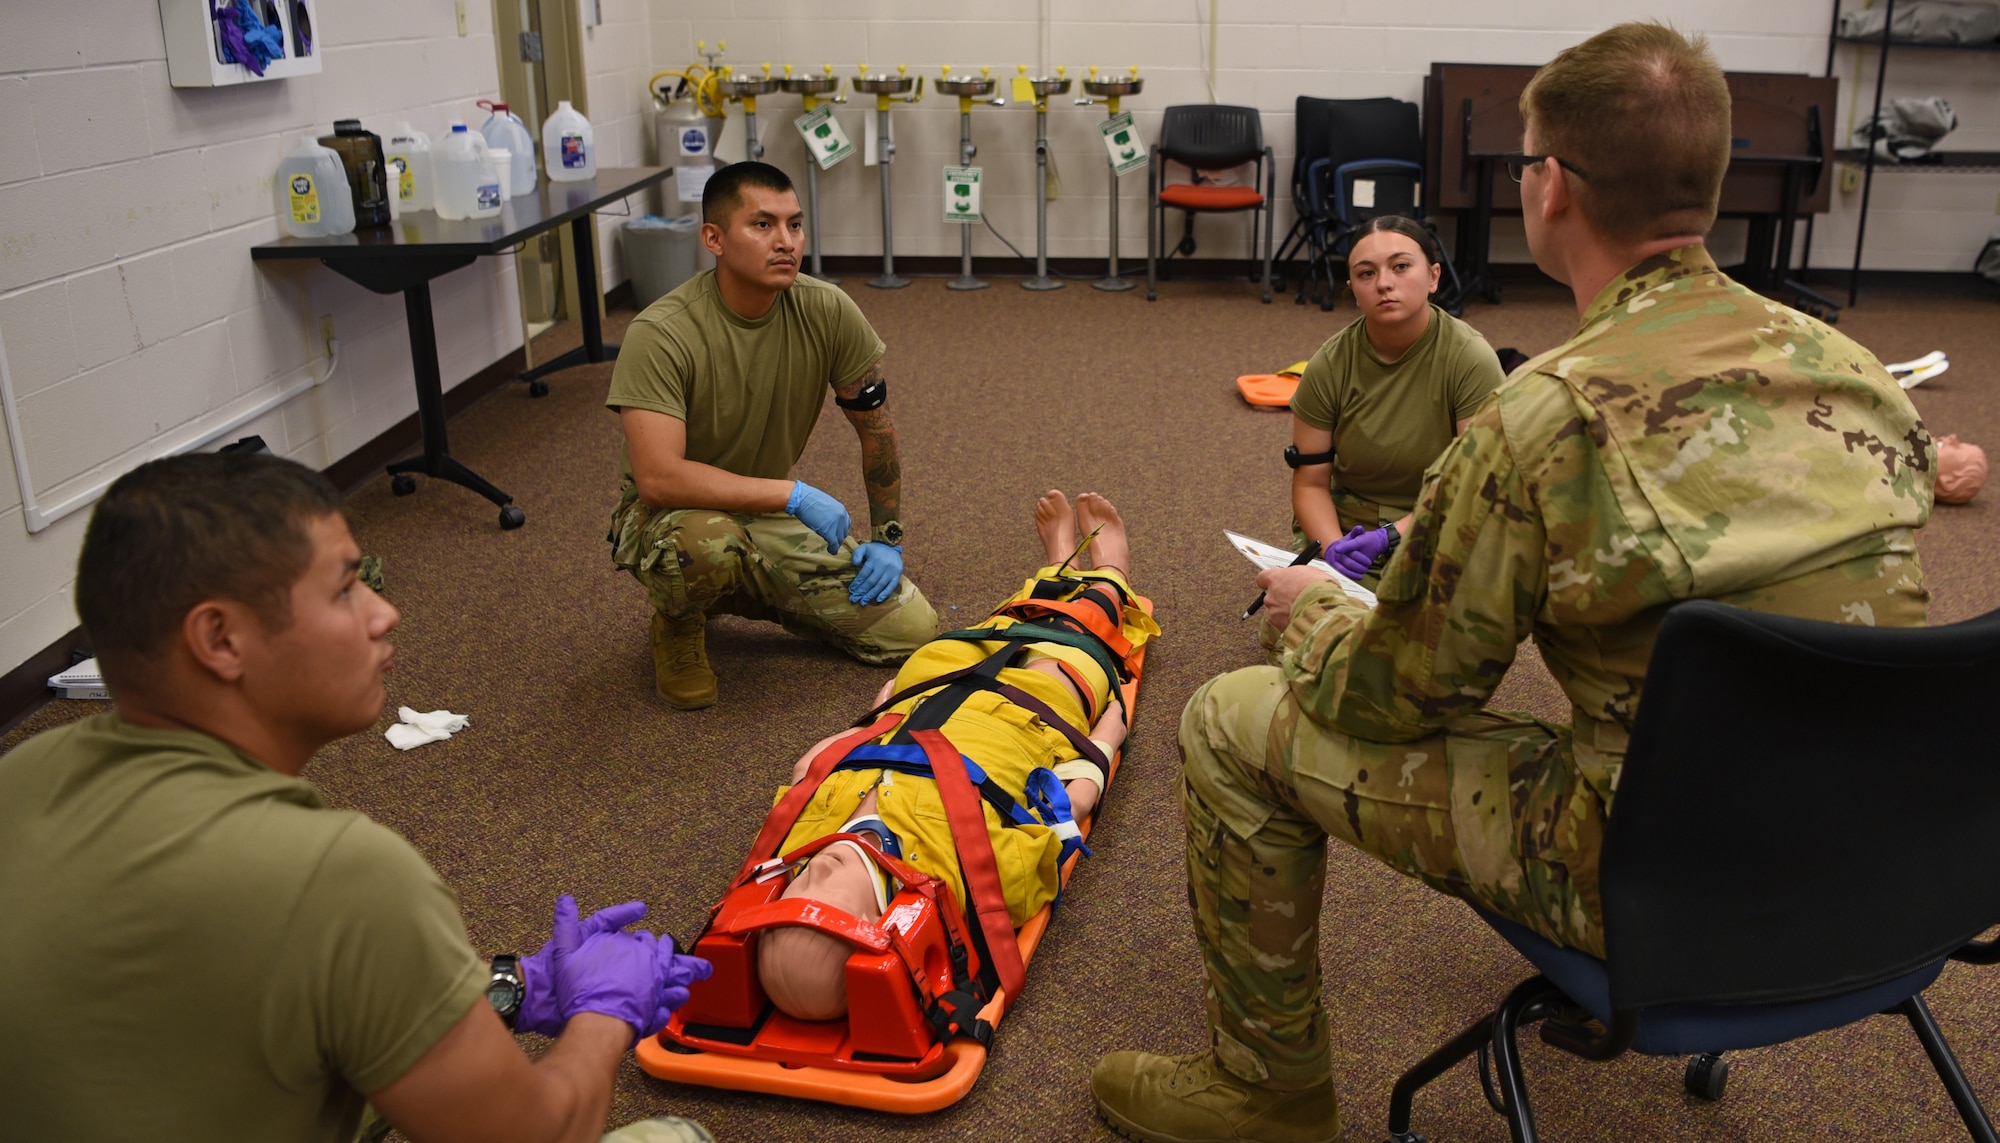 U.S. Air Force Staff Sgt. Robert Kirkpatrick, 312th Training Squadron instructor, provides feedback to his joint service student on their Emergency Medical Responder psychomotor skills evaluation, Goodfellow Air Force Base, Texas, May 6, 2022. Kirkpatrick replaced lecture instruction with coaching and mentoring techniques to build trust with his students and advance training. (U.S. Air Force photo by Senior Airman Abbey Rieves)